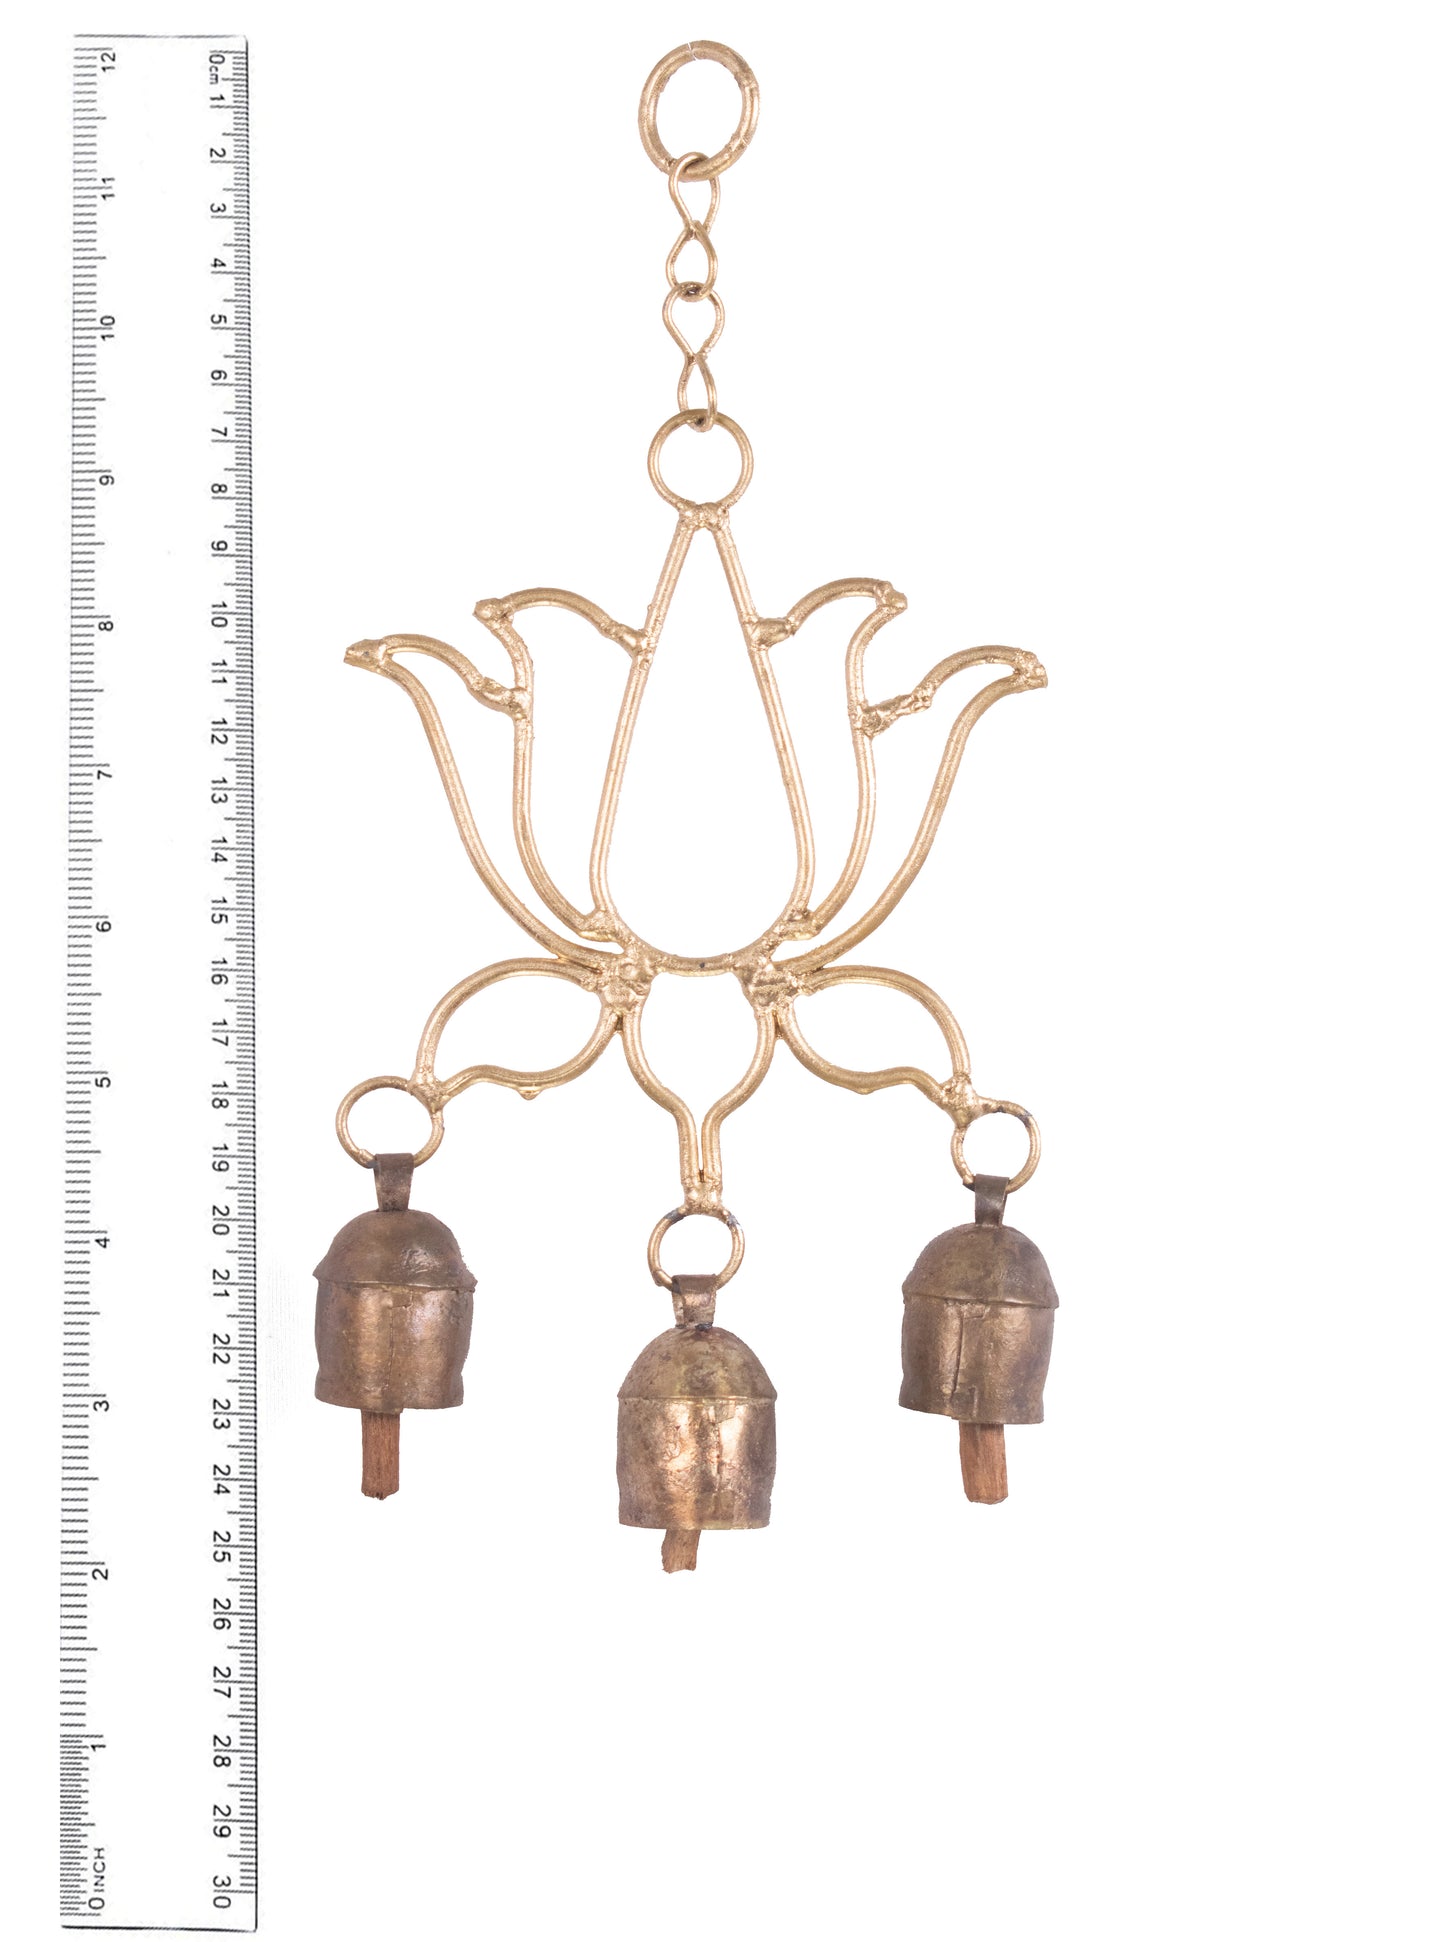 Hand Made Metal Bells Wrought Iron Copper-Zinc Coated Home Décor Chimes Cow Bell   - Lotus - 3 Bells  -  SKU: 0042